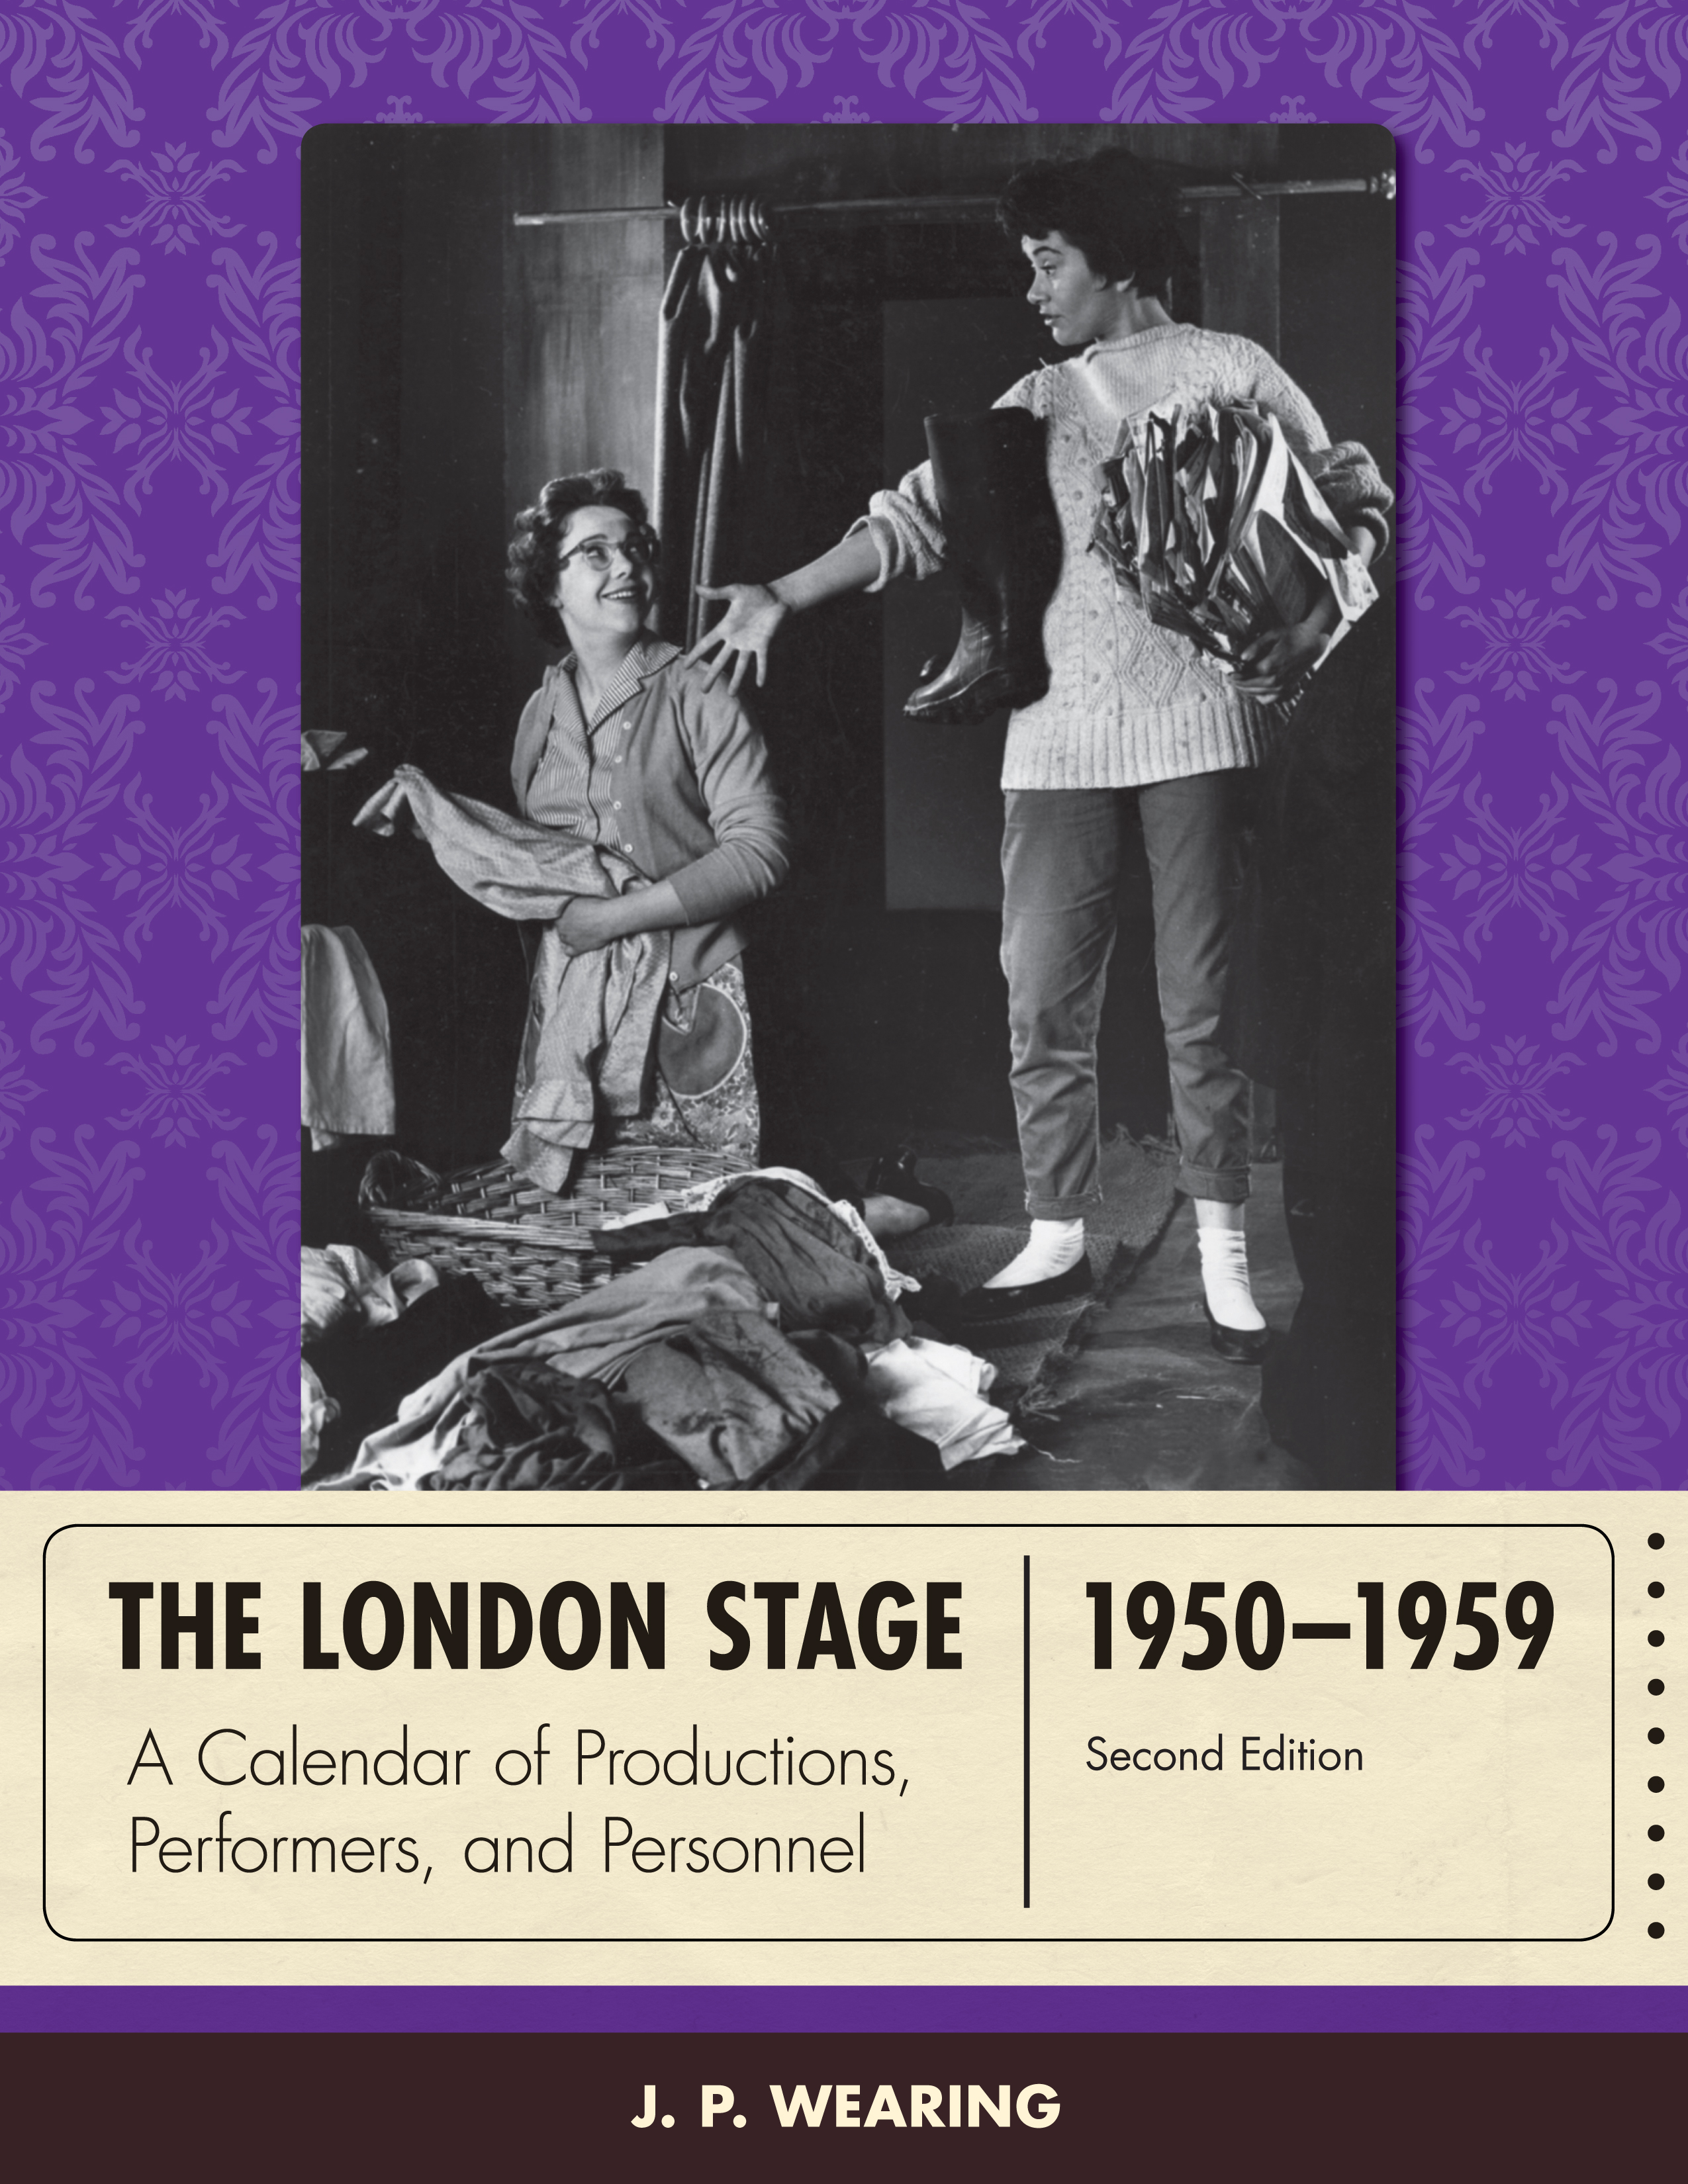 The London Stage 1950-1959: A Calendar of Productions, Performers, and Personnel